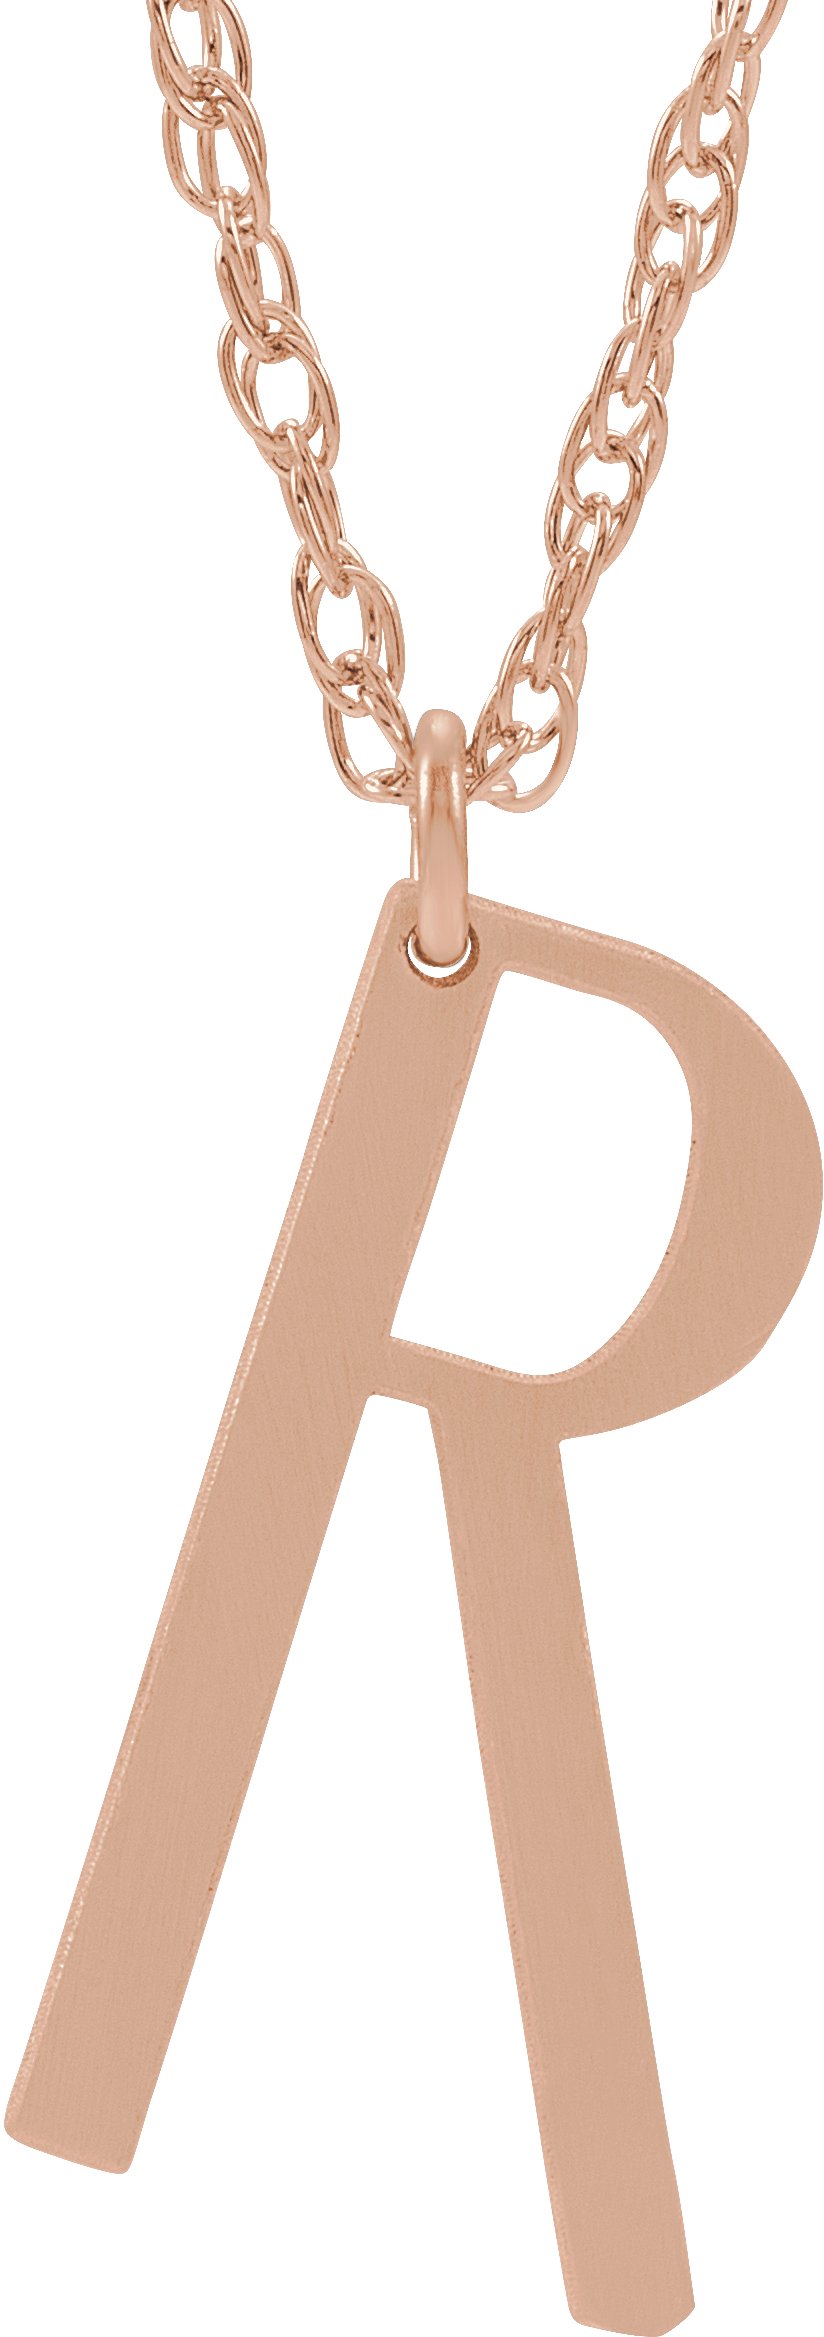 14K Rose Gold-Plated Sterling Silver Block Initial R 16-18" Necklace with Brush Finish